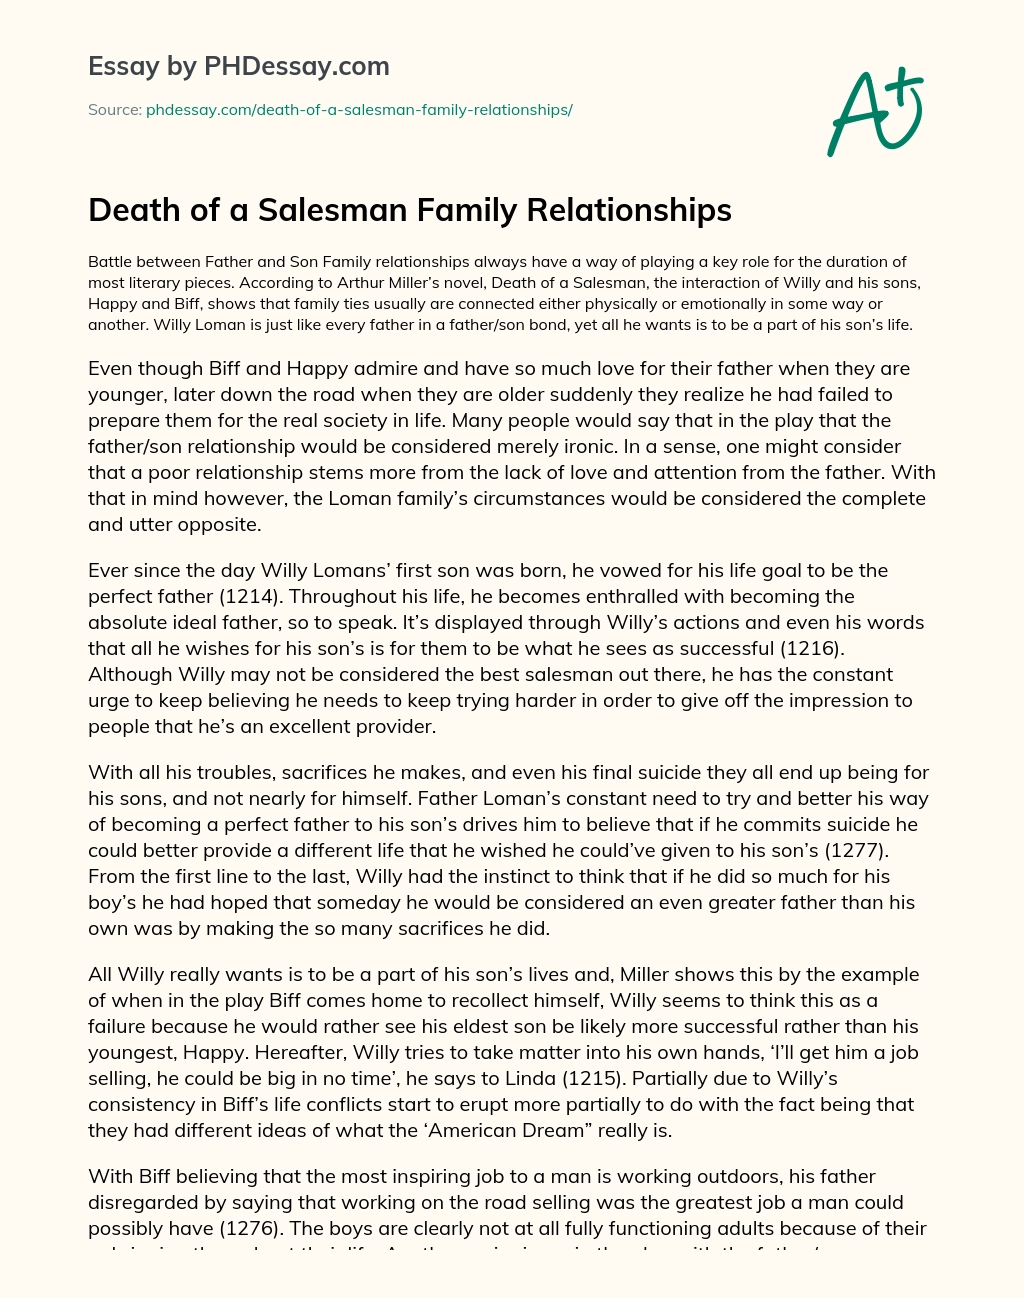 Death of a Salesman Family Relationships essay